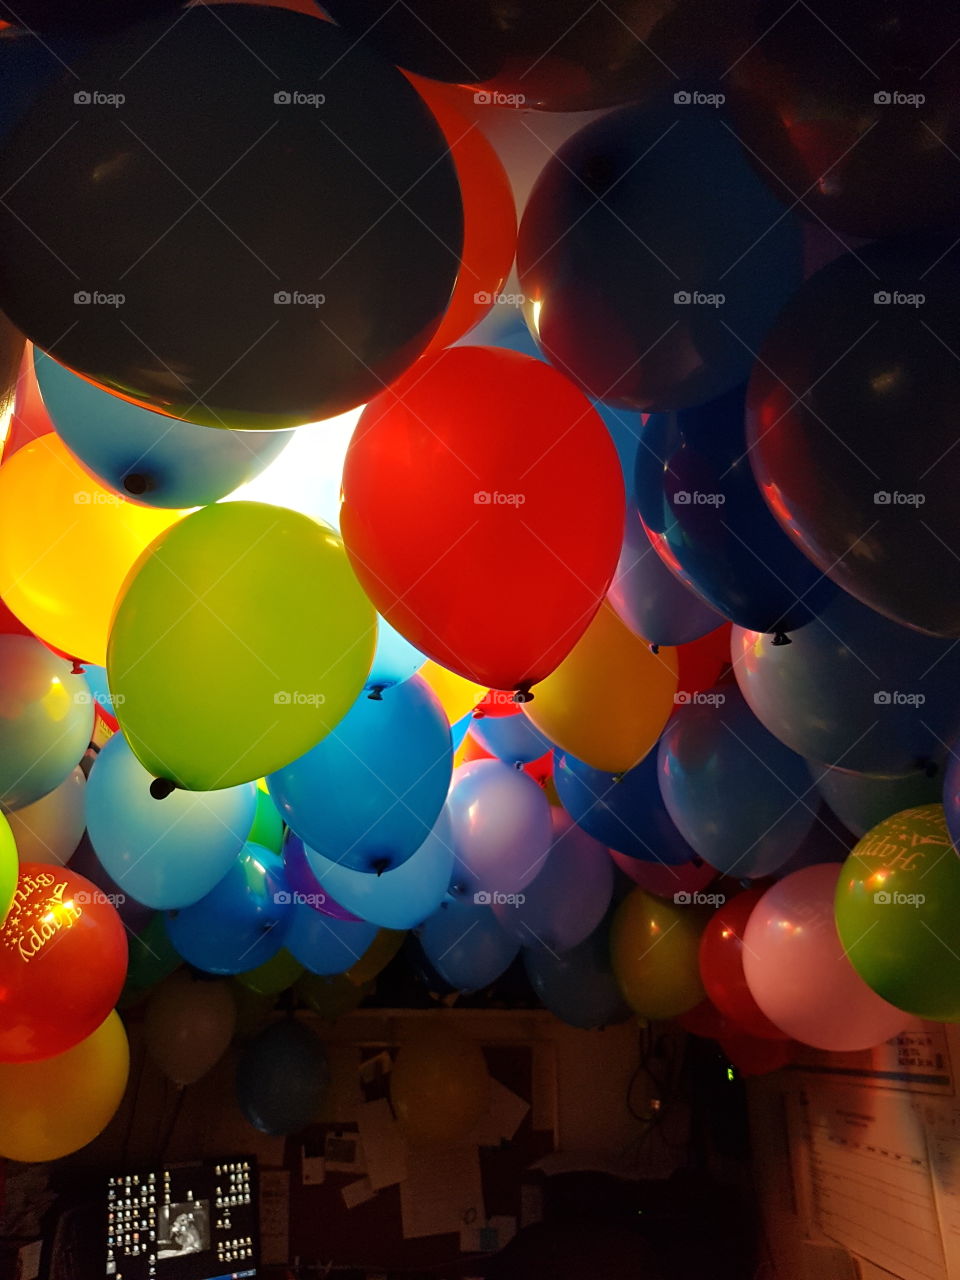 Balloon overhaul! A green, blue, red, yellow birthday surprise in a small office space.